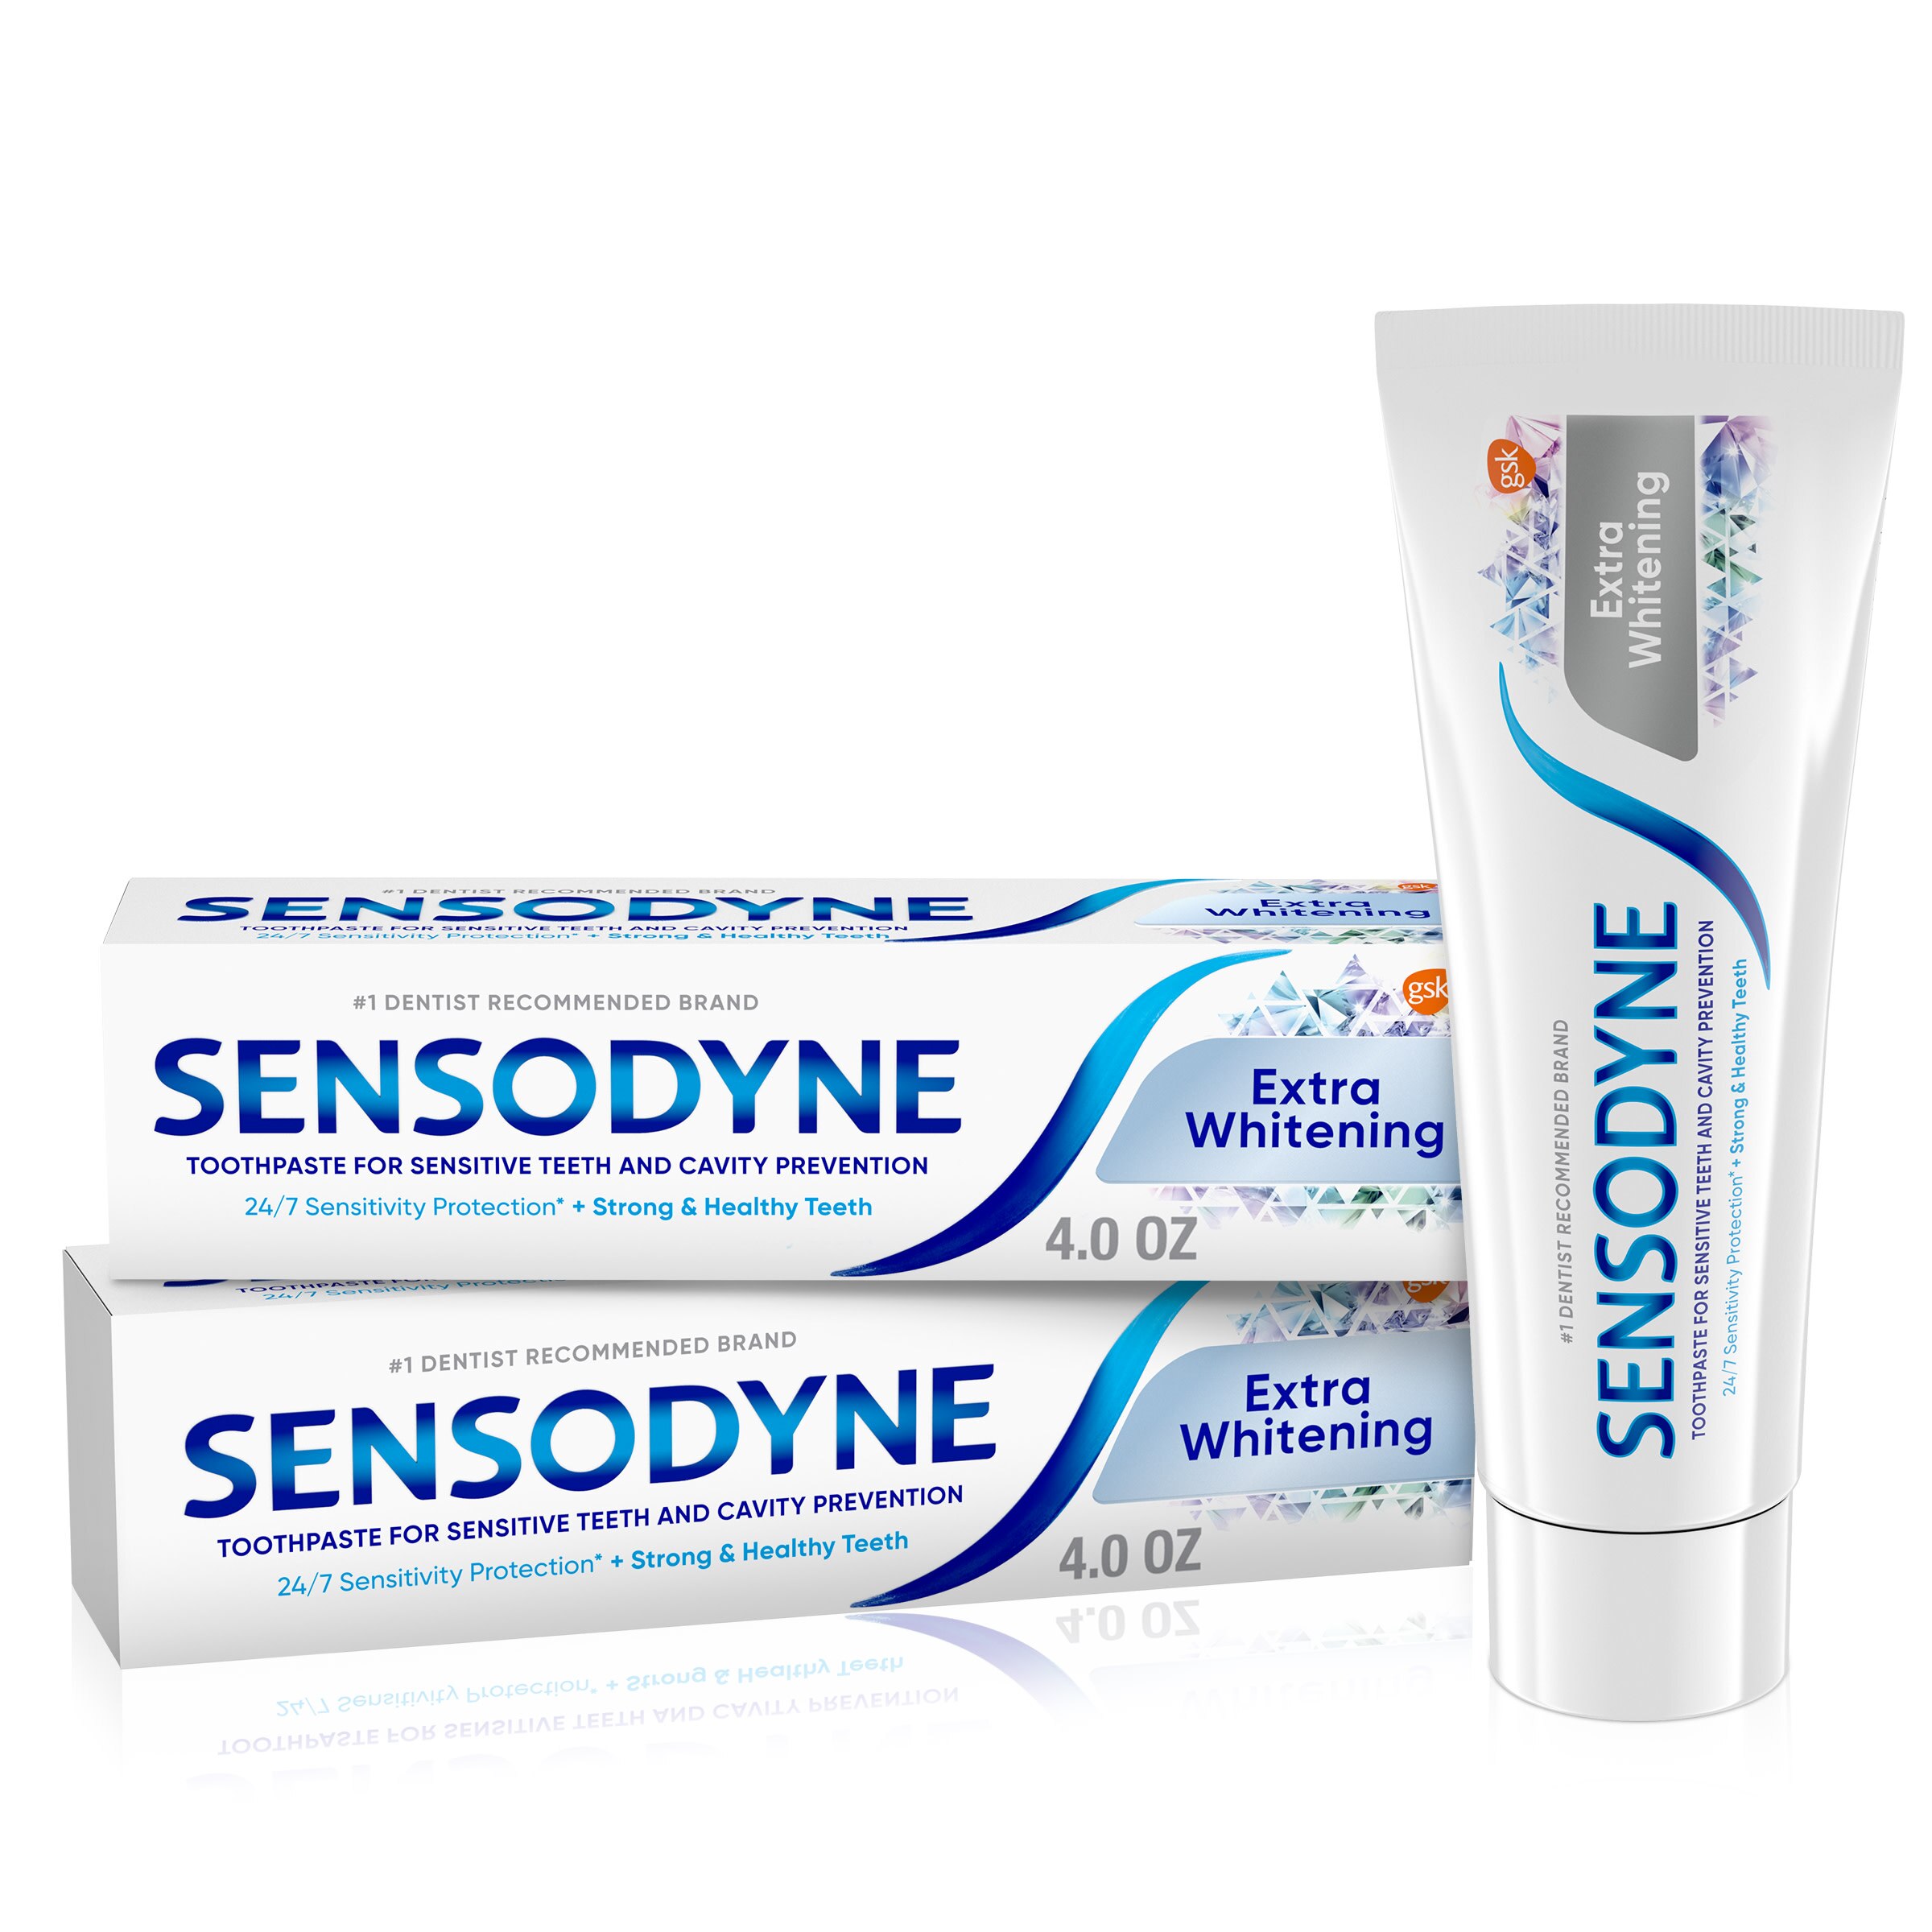 Sensodyne Extra Whitening Toothpaste for Sensitive Teeth and Cavity Protection